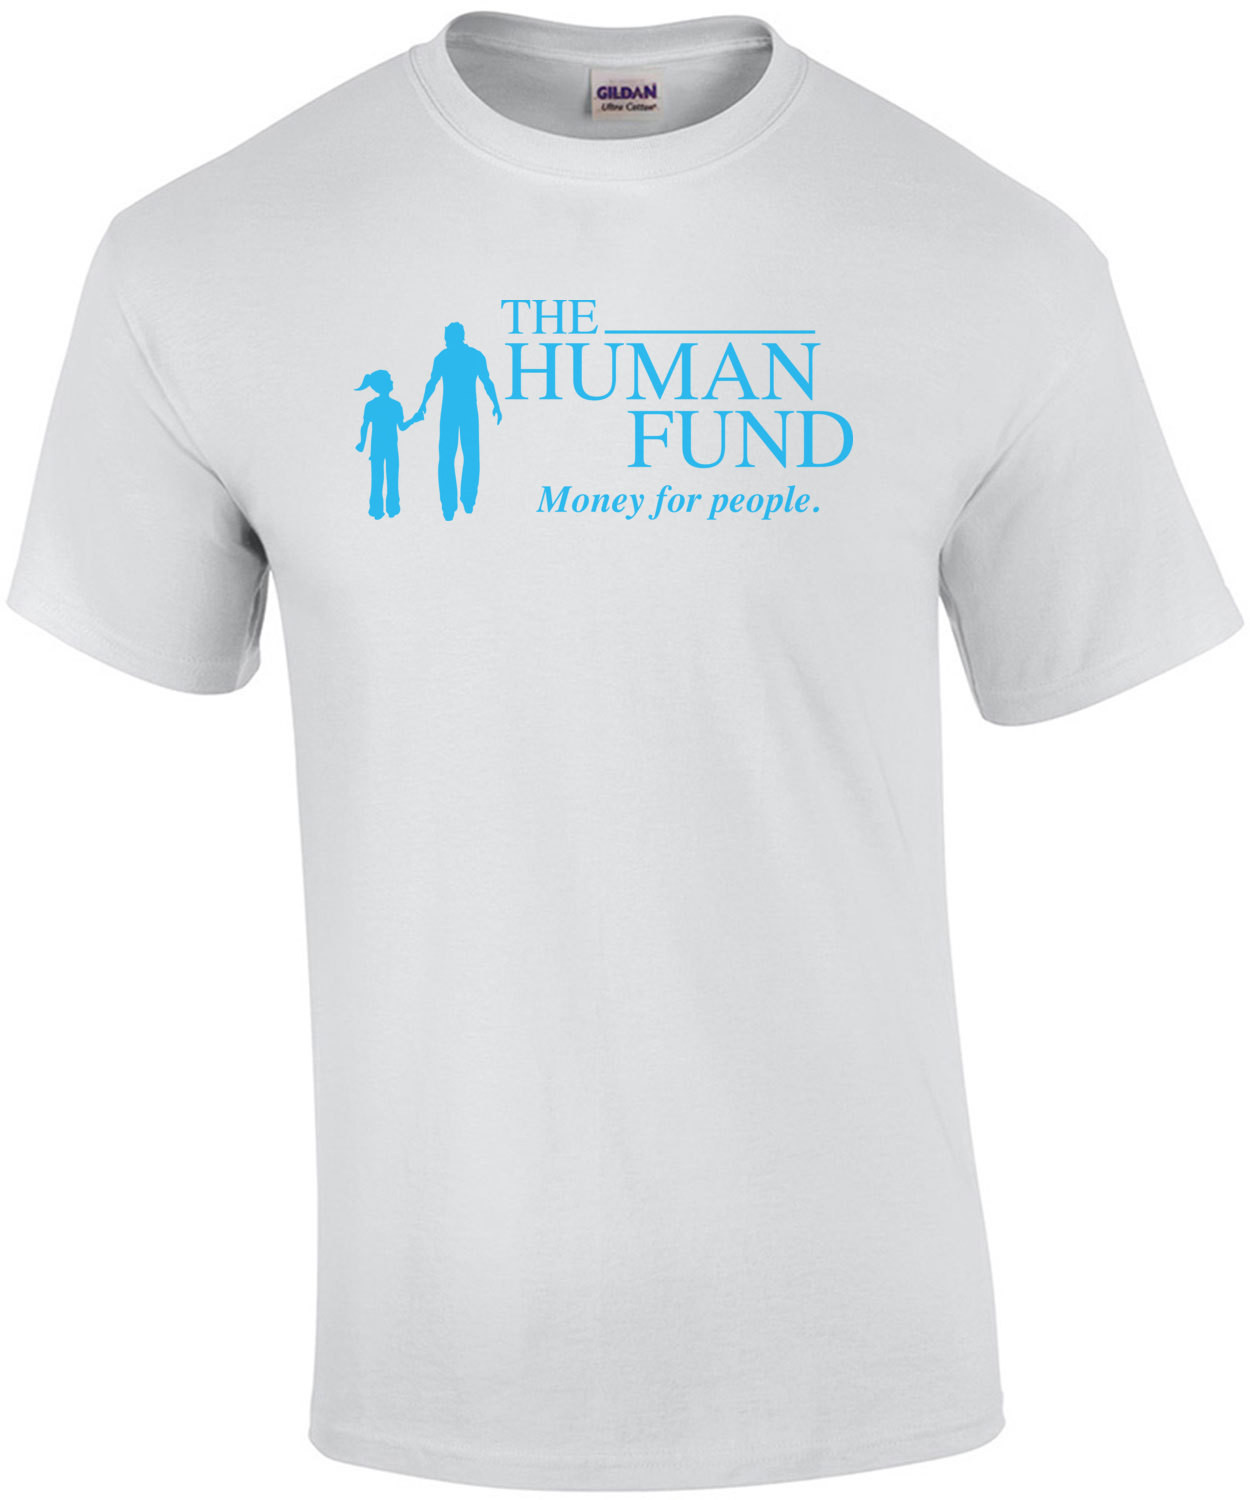 The Human Fund Money For People 